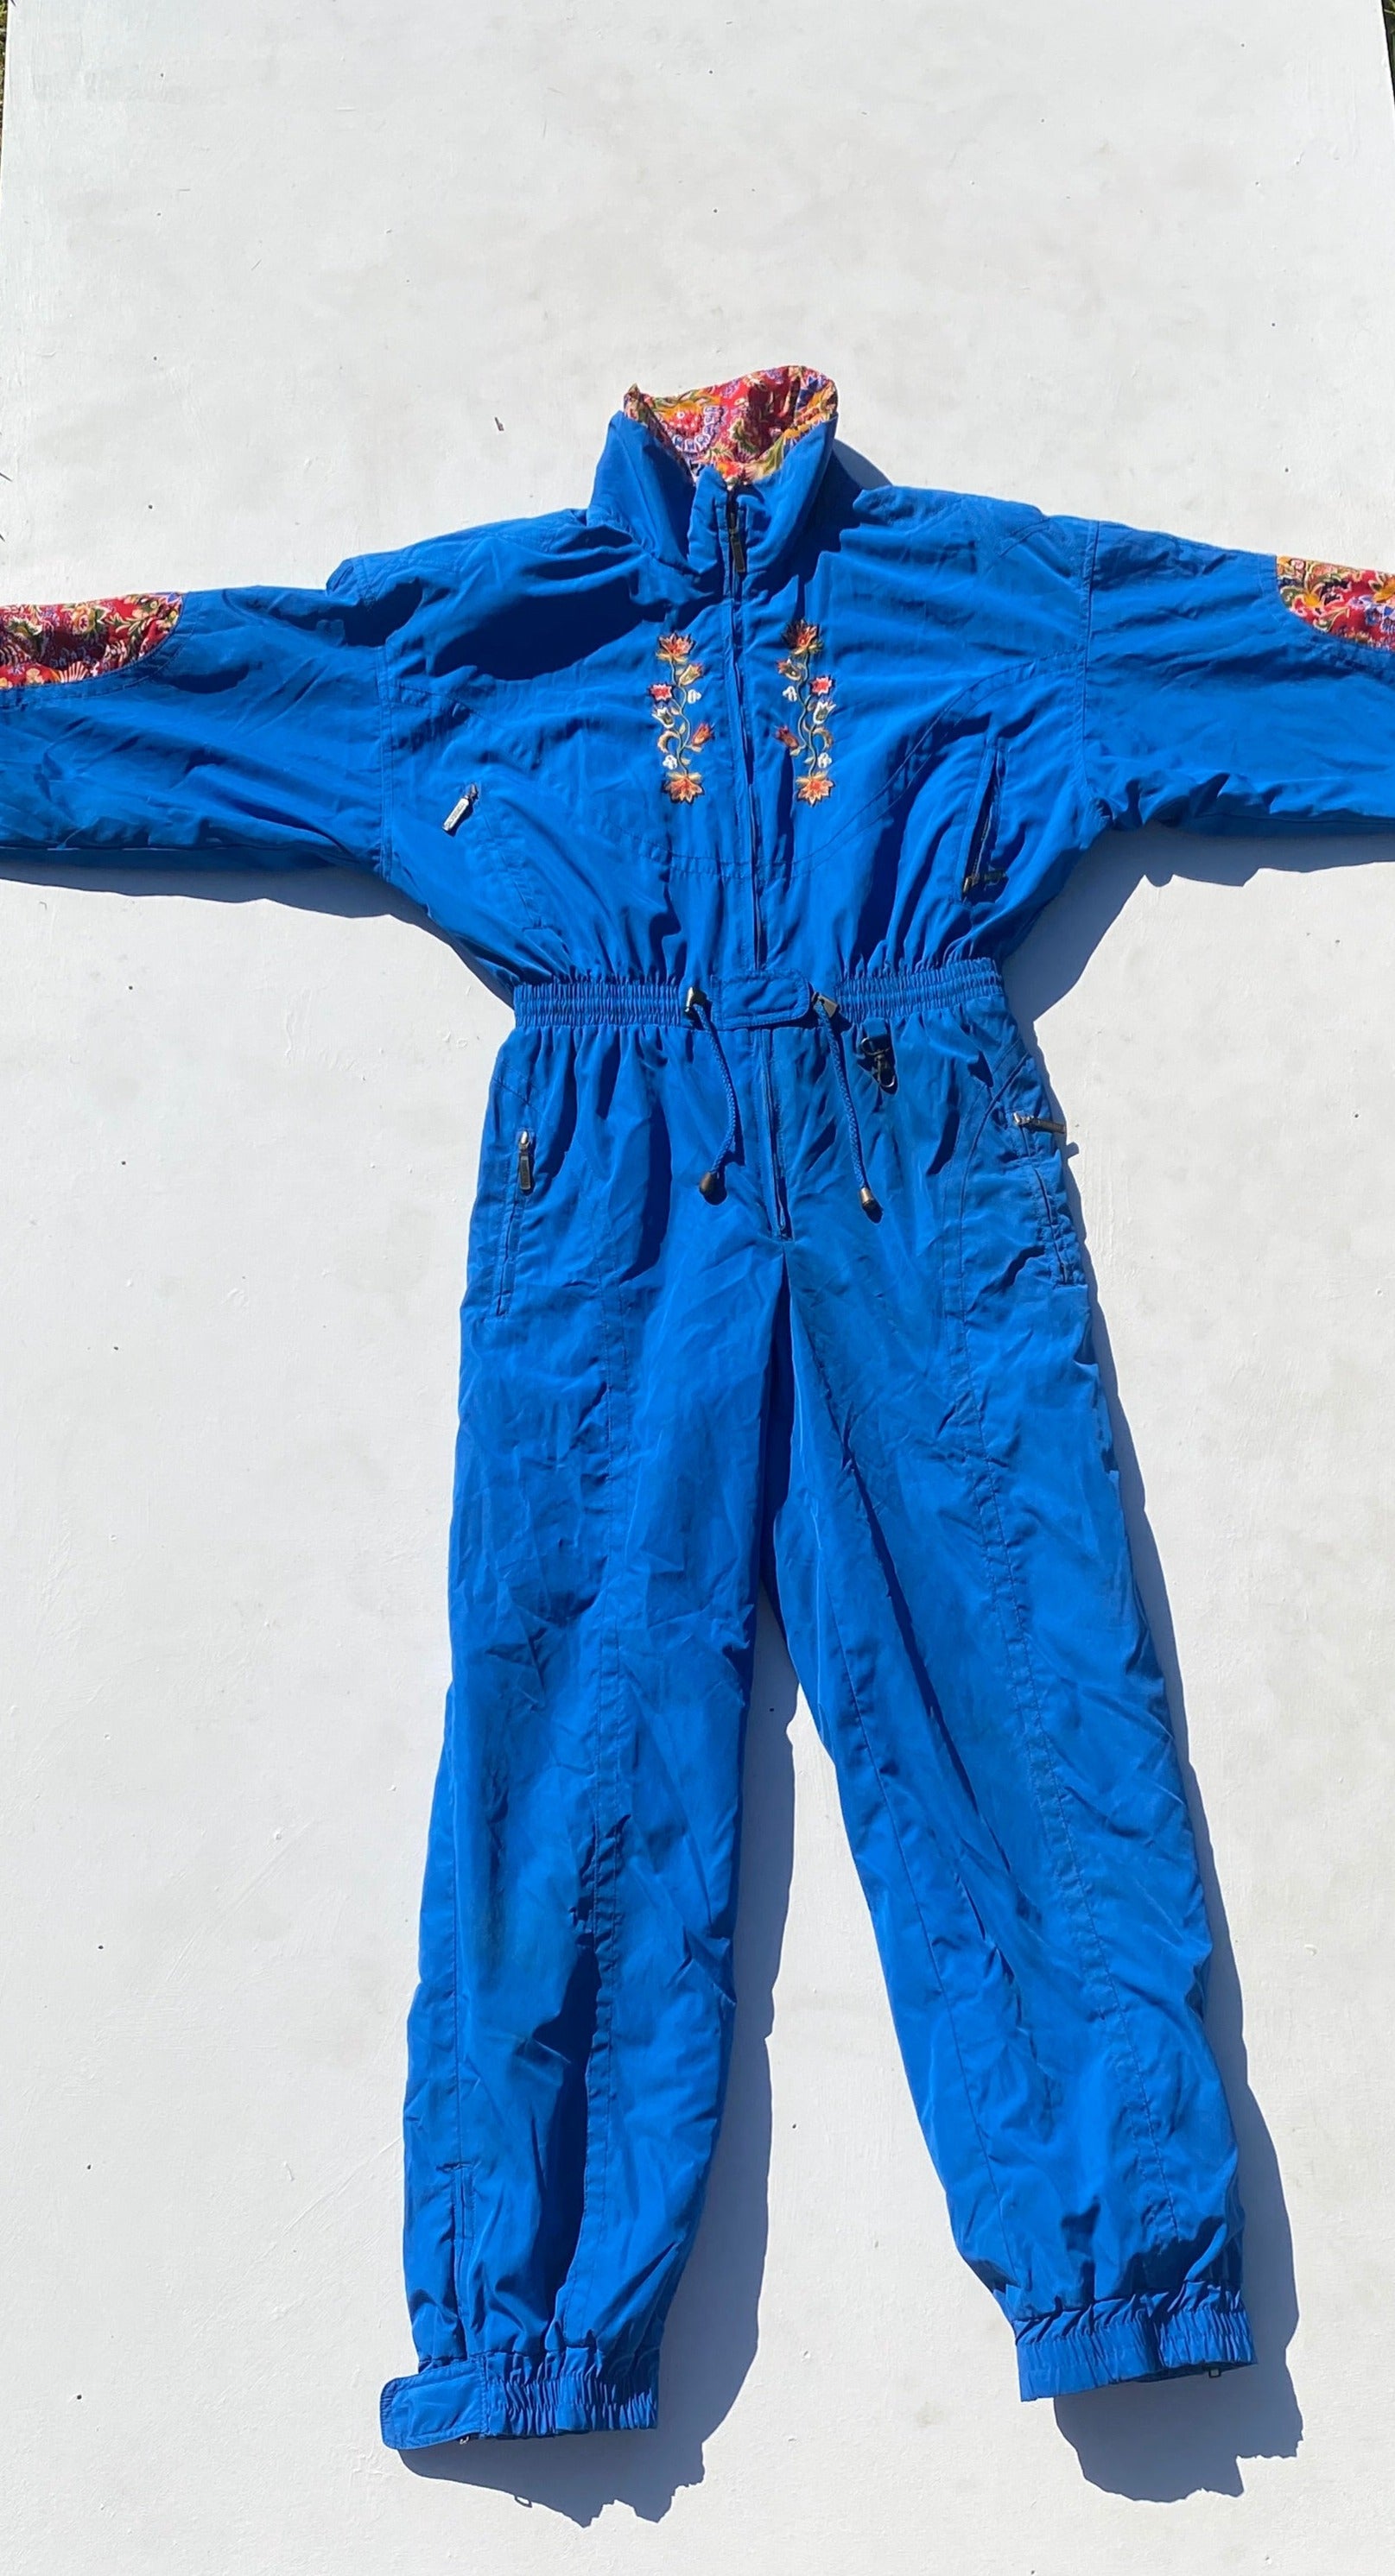 Powderhorn royal blue embroidered one piece ski suit with red, yellow, green and blue patterned floral fabric patches, with drawstring waist. Front view flat lay